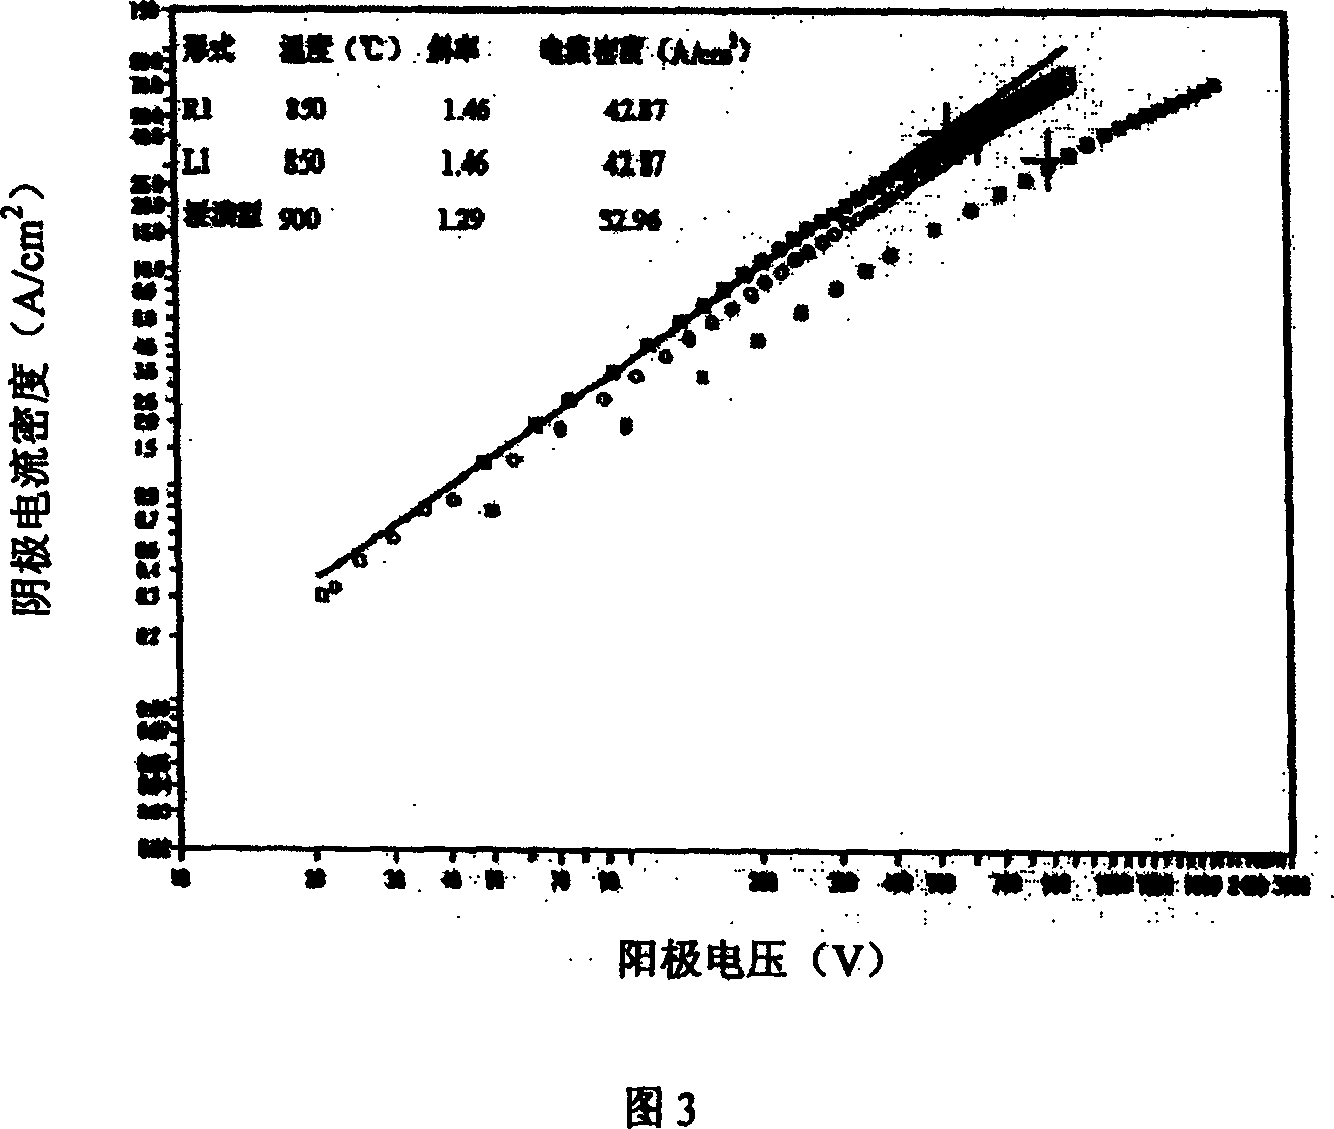 Production for powdery diffused cathode base material containing scandium